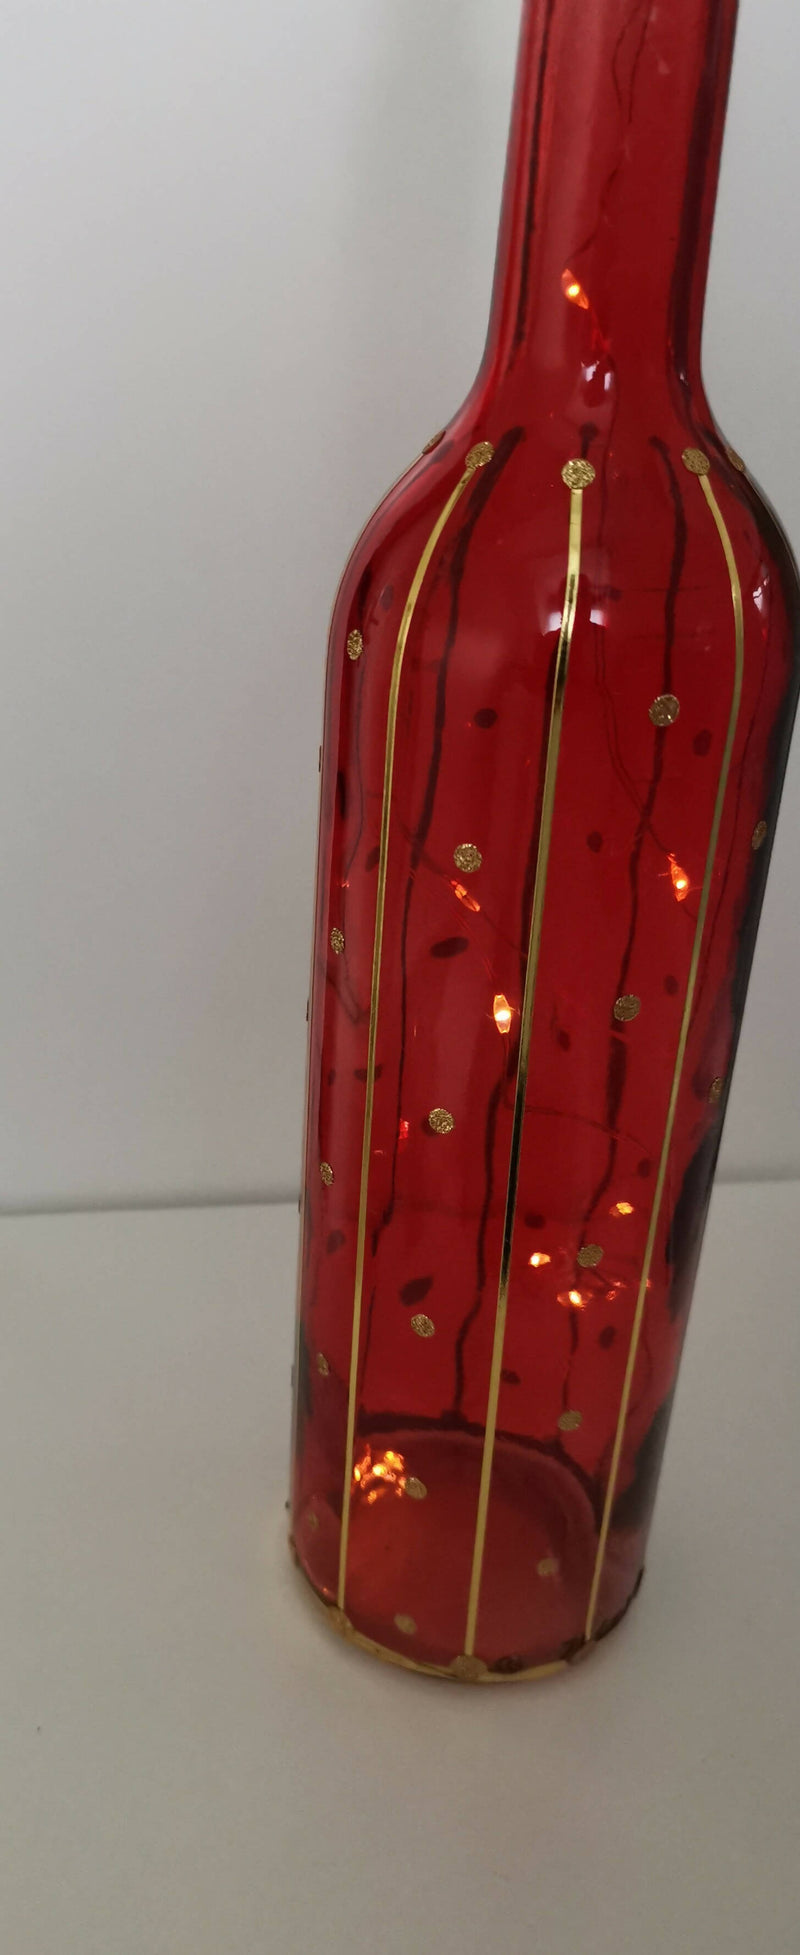 DECORATIVE BOTTLES WITH LIGHTS